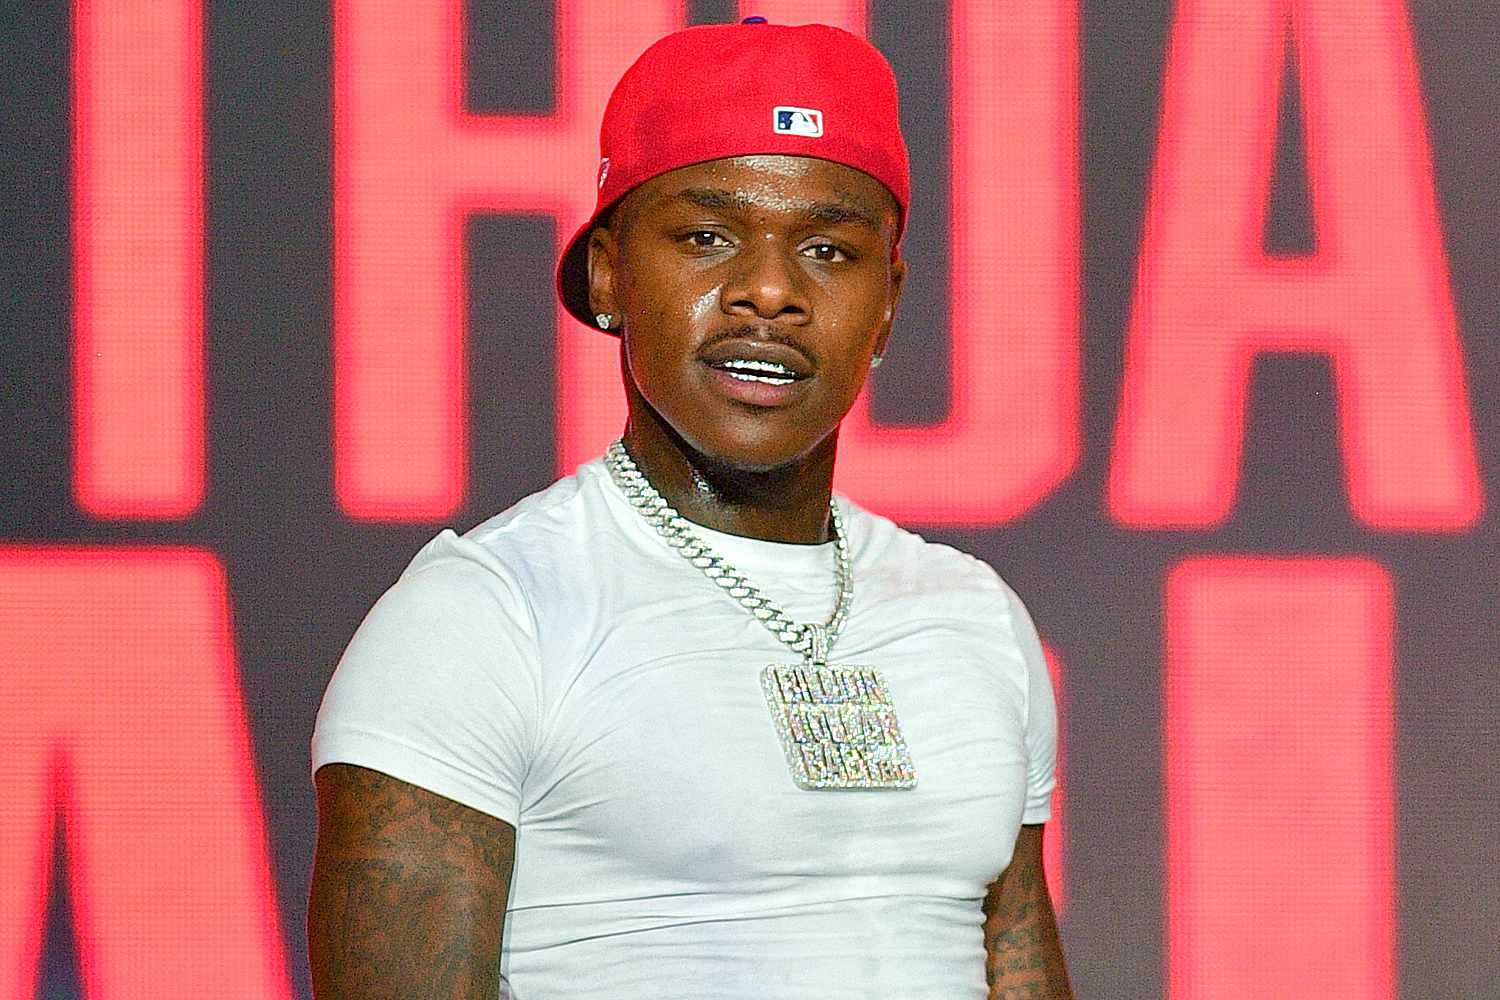 DaBaby Rapper - DaBaby Store